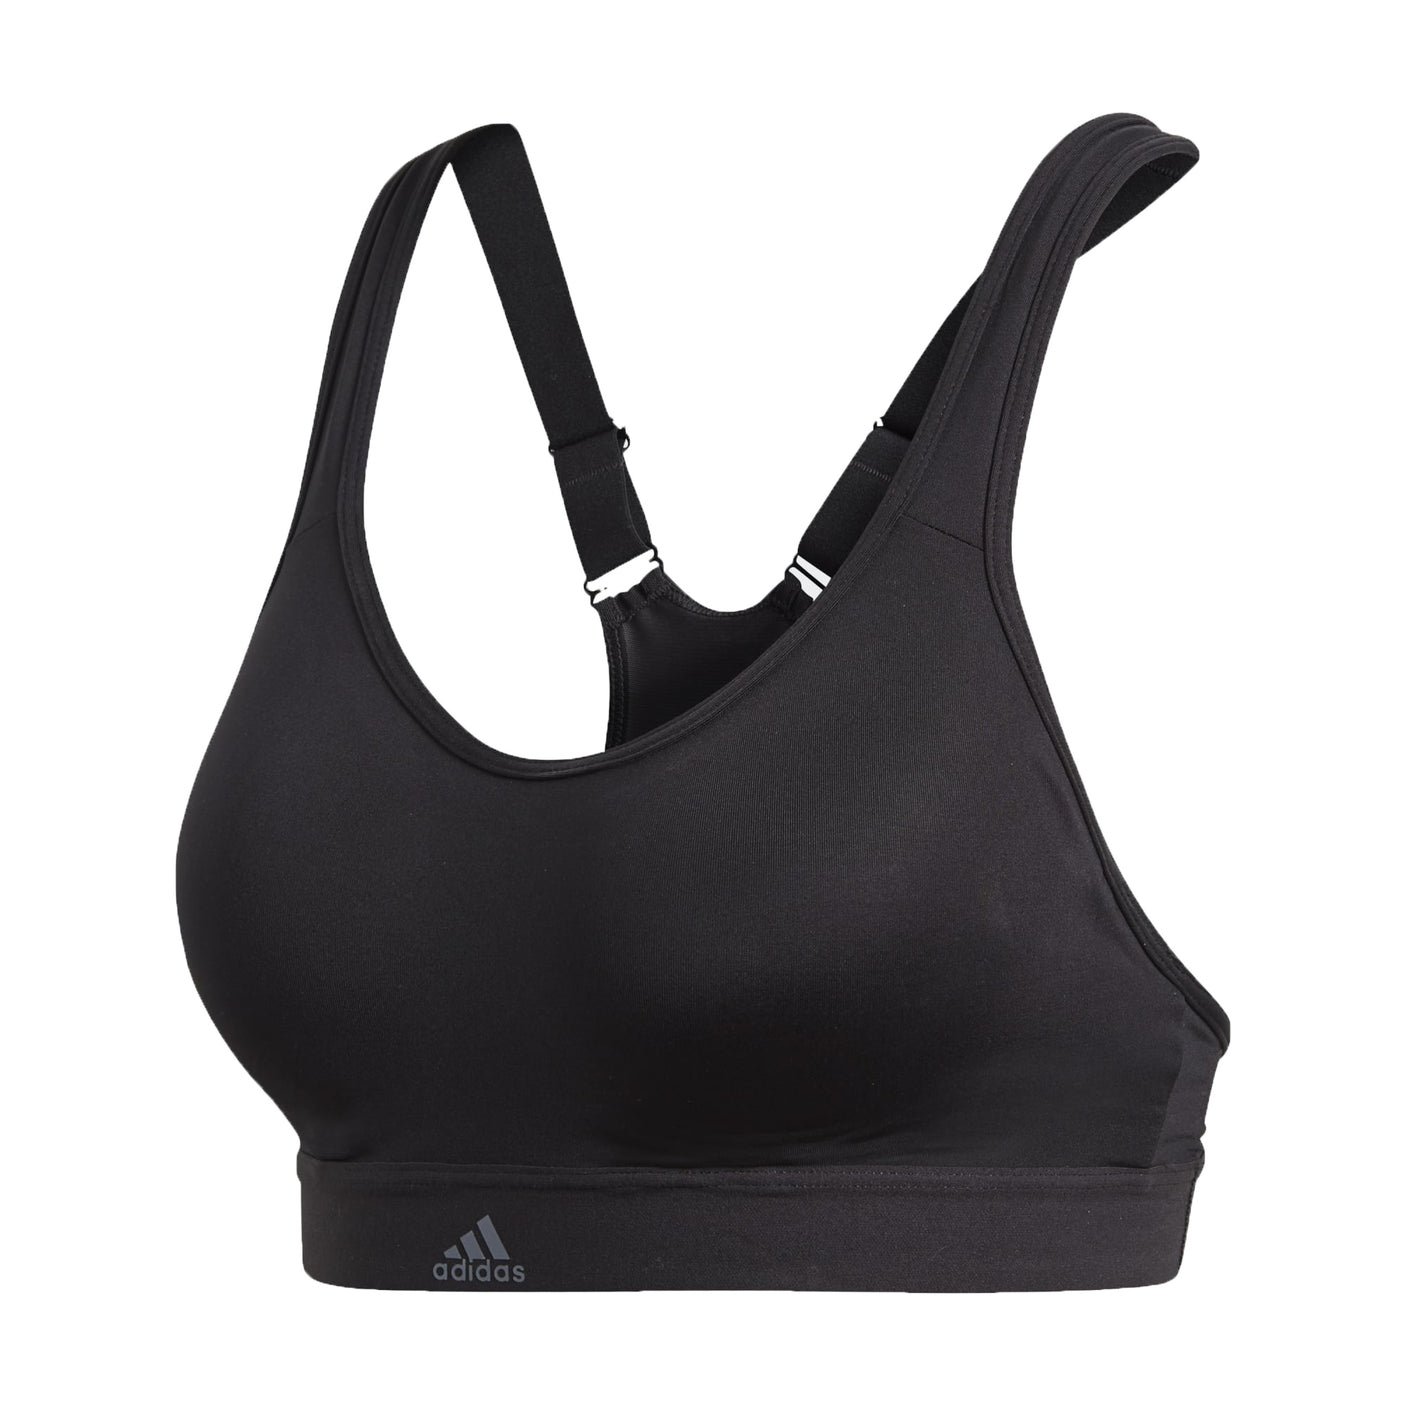 adidas Womens Stronger For It Racer Sports Bra Black Front